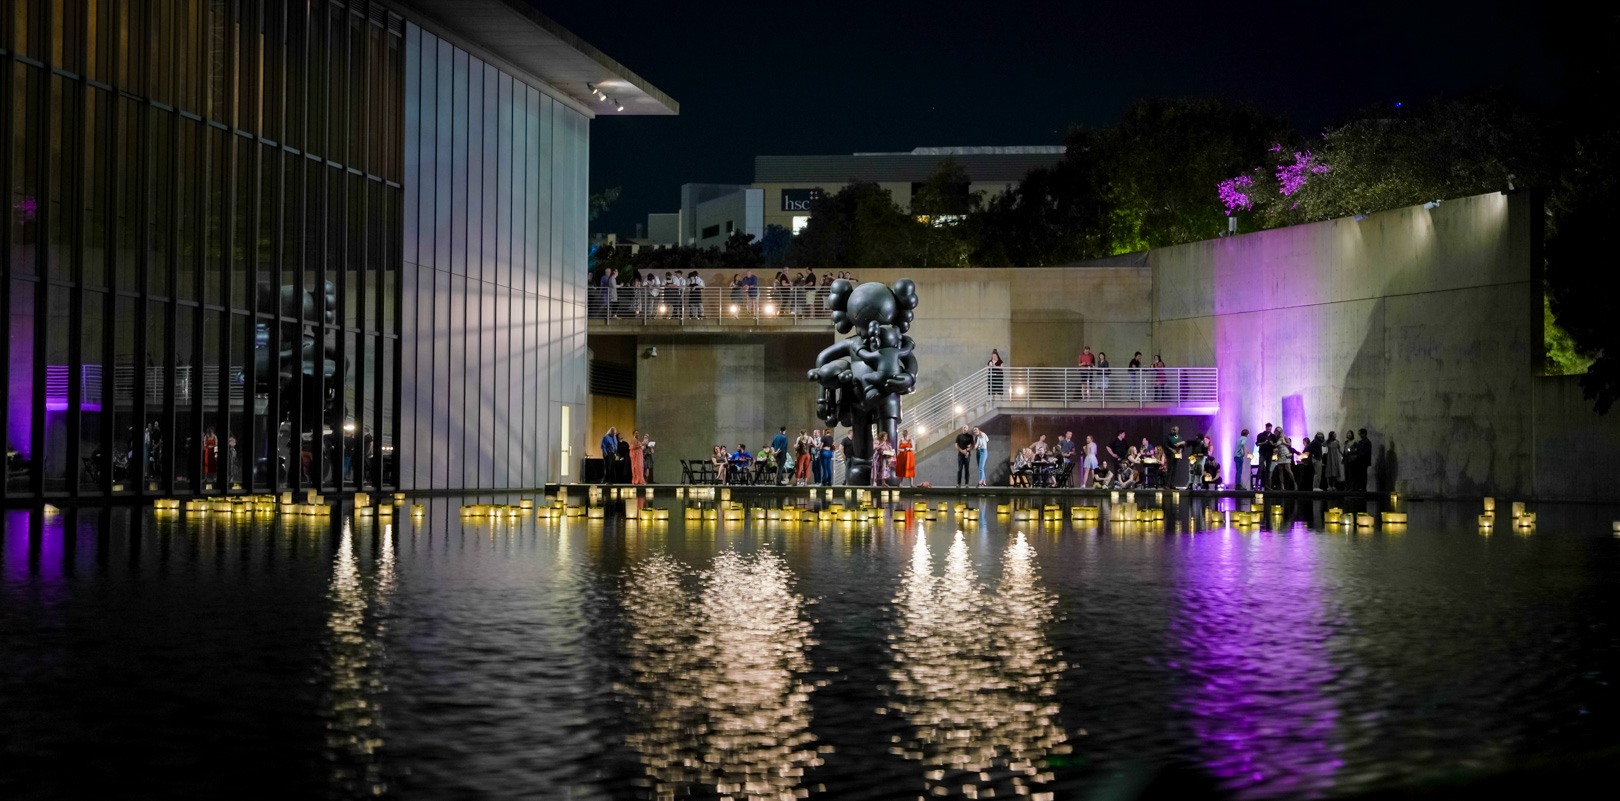 A reflecting pond with lanterns lit in front of a large sculpture